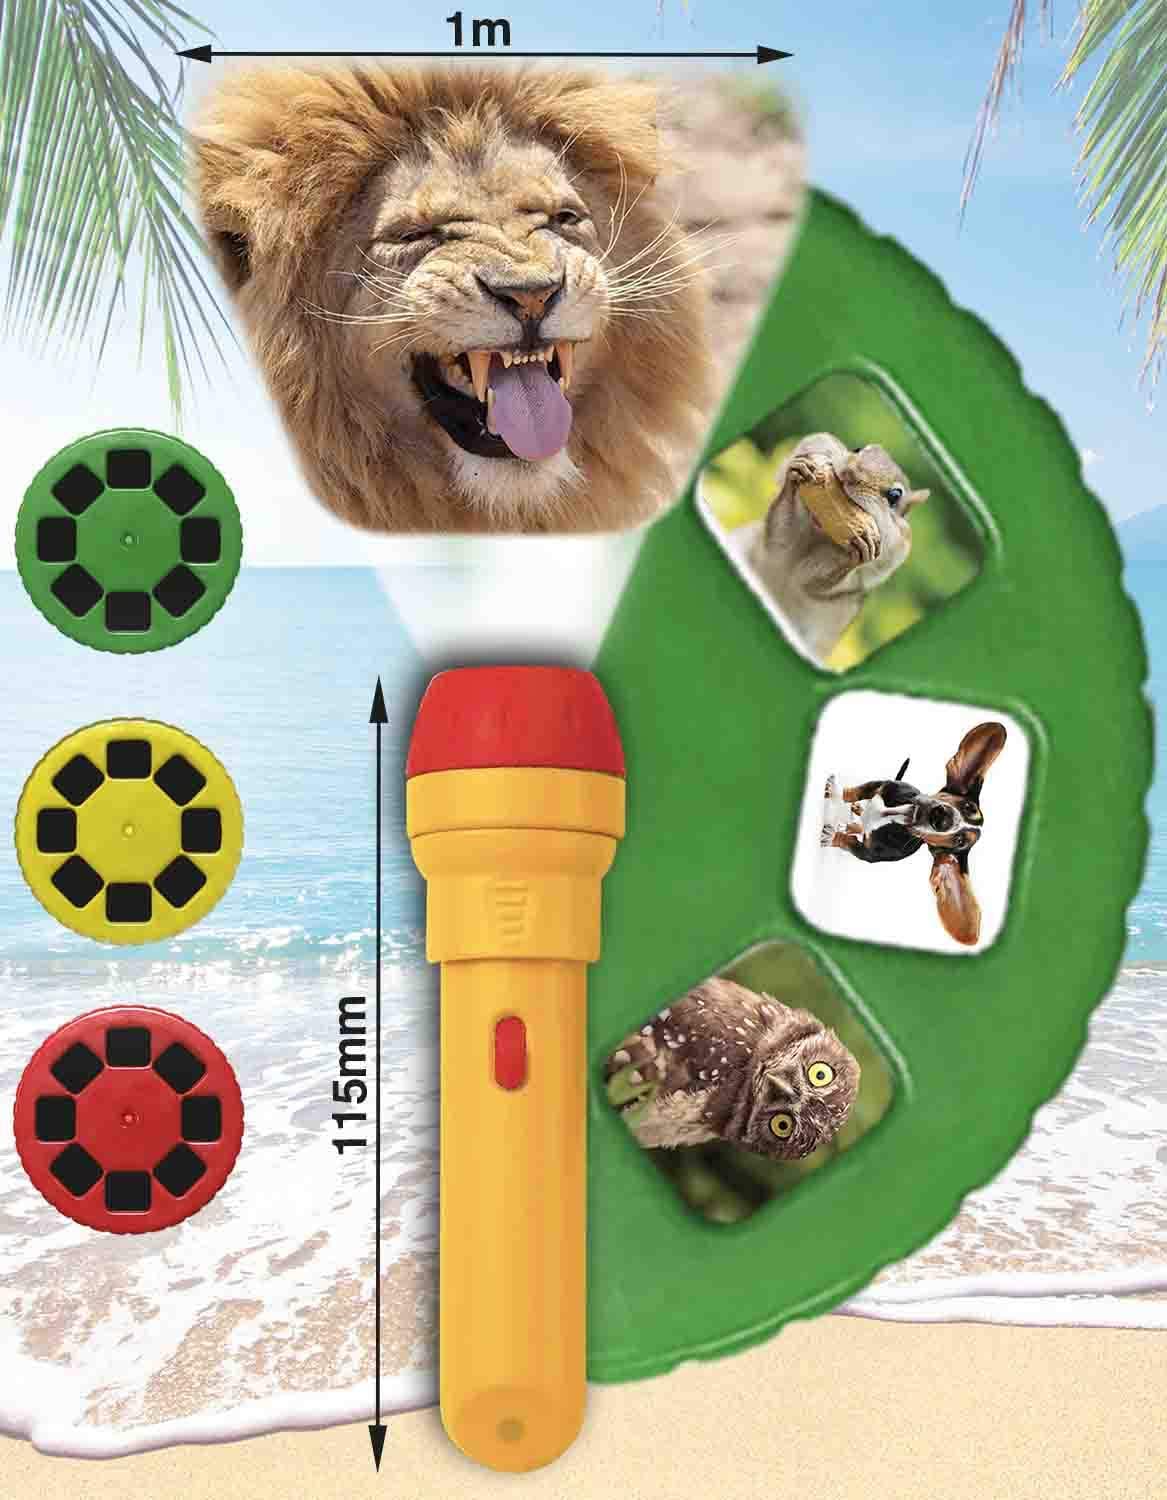 Funny Animals Torch and Projector